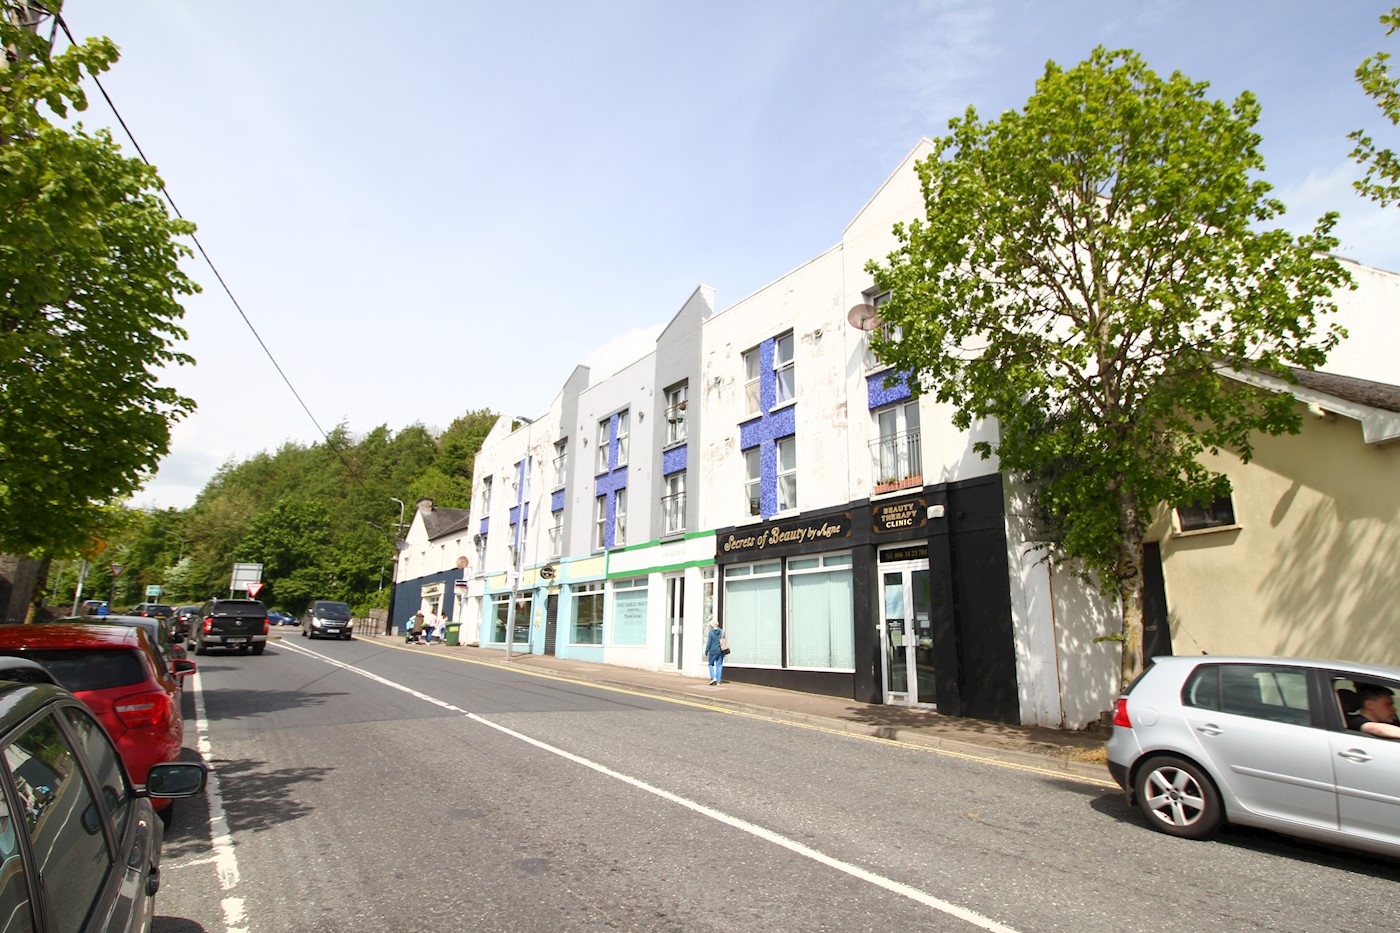 Apartment 9, Russell Court, Monaghan Town, Co. Monaghan, H18 AK58 1/11